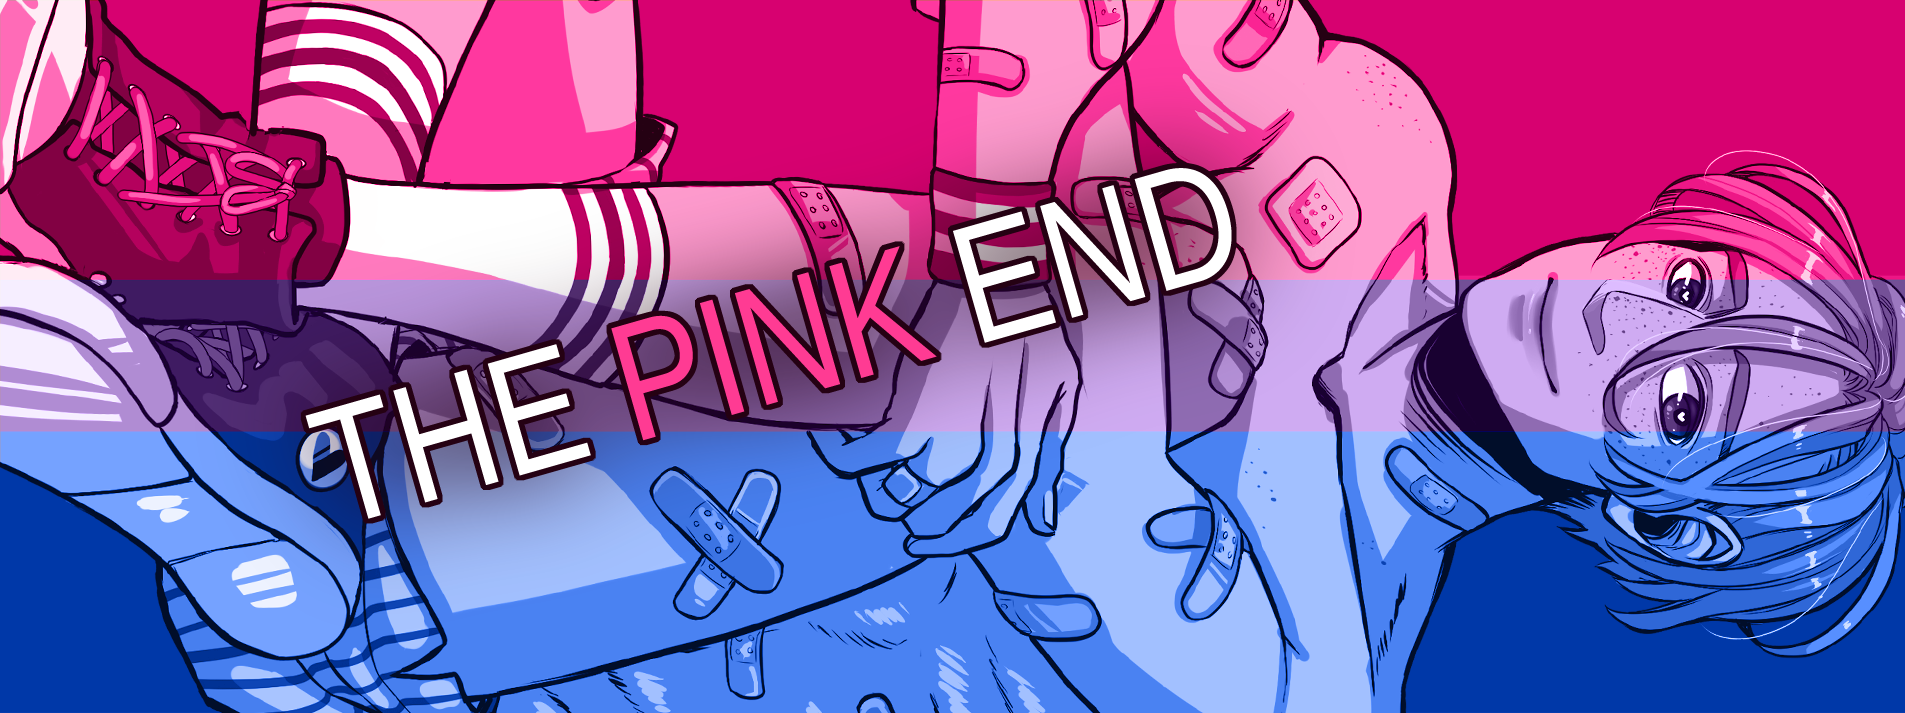 The Pink End 18+